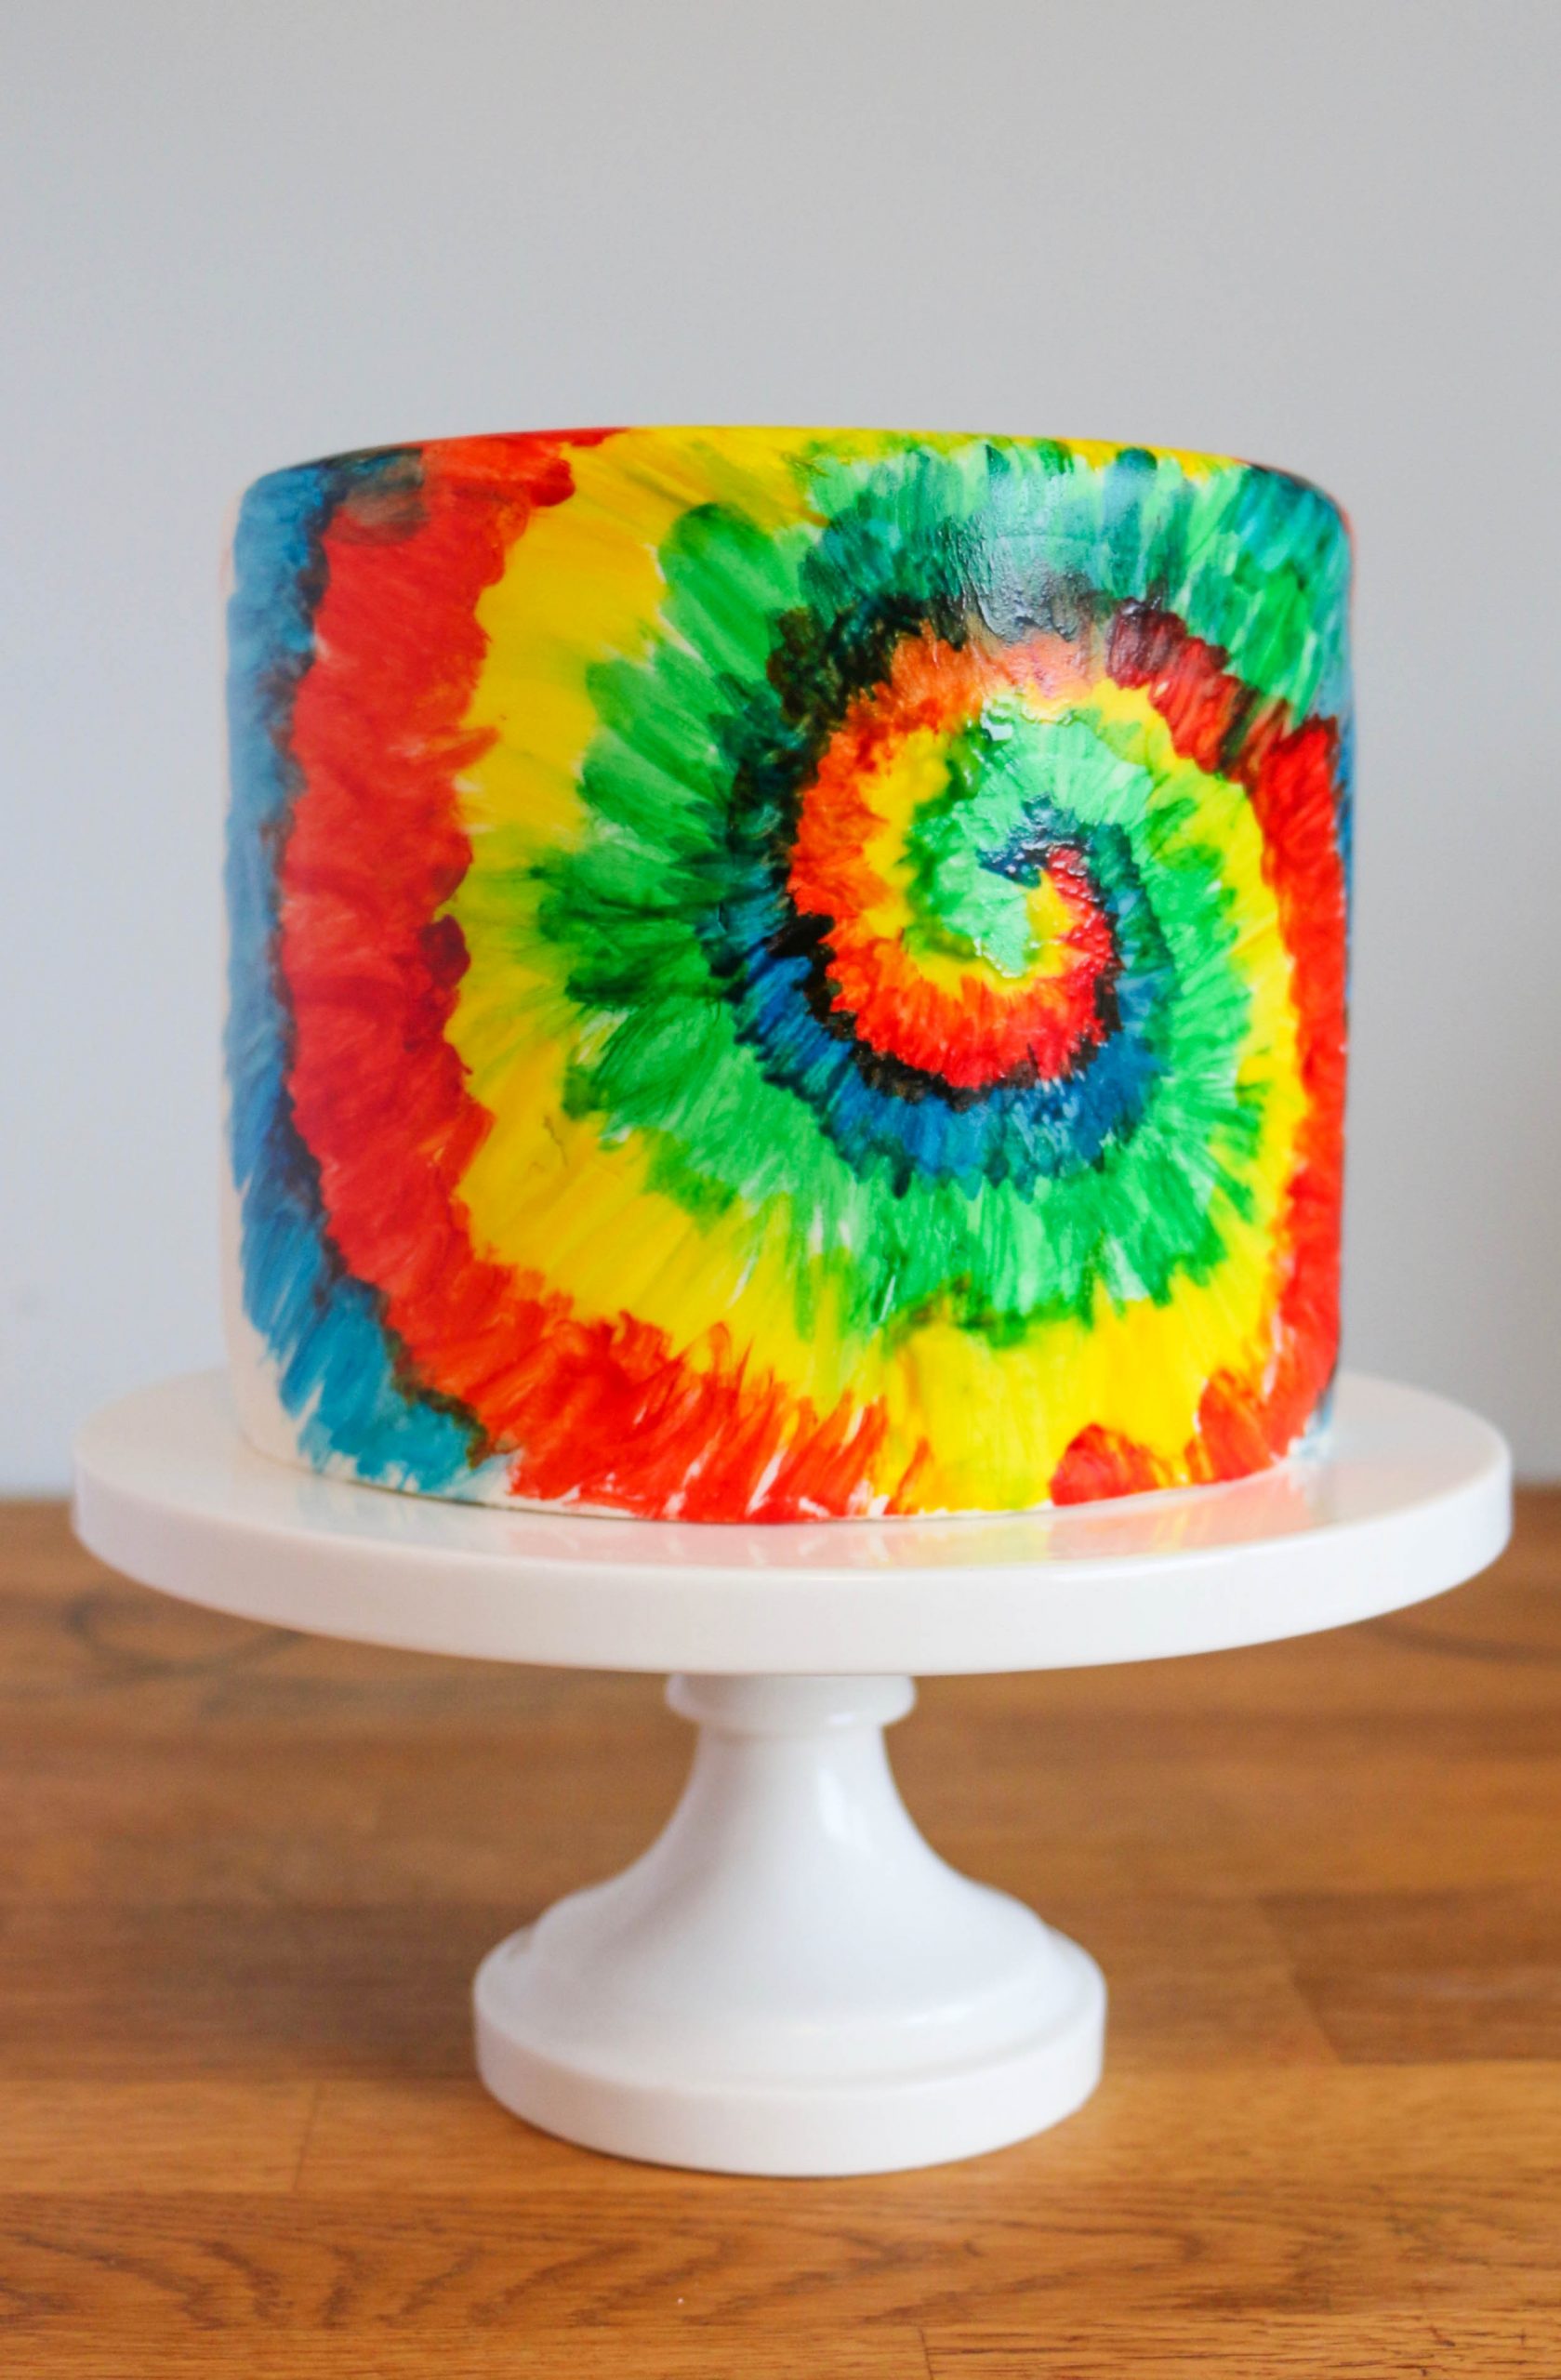 How to Make a Tie-Dye Cake — Inside and Out